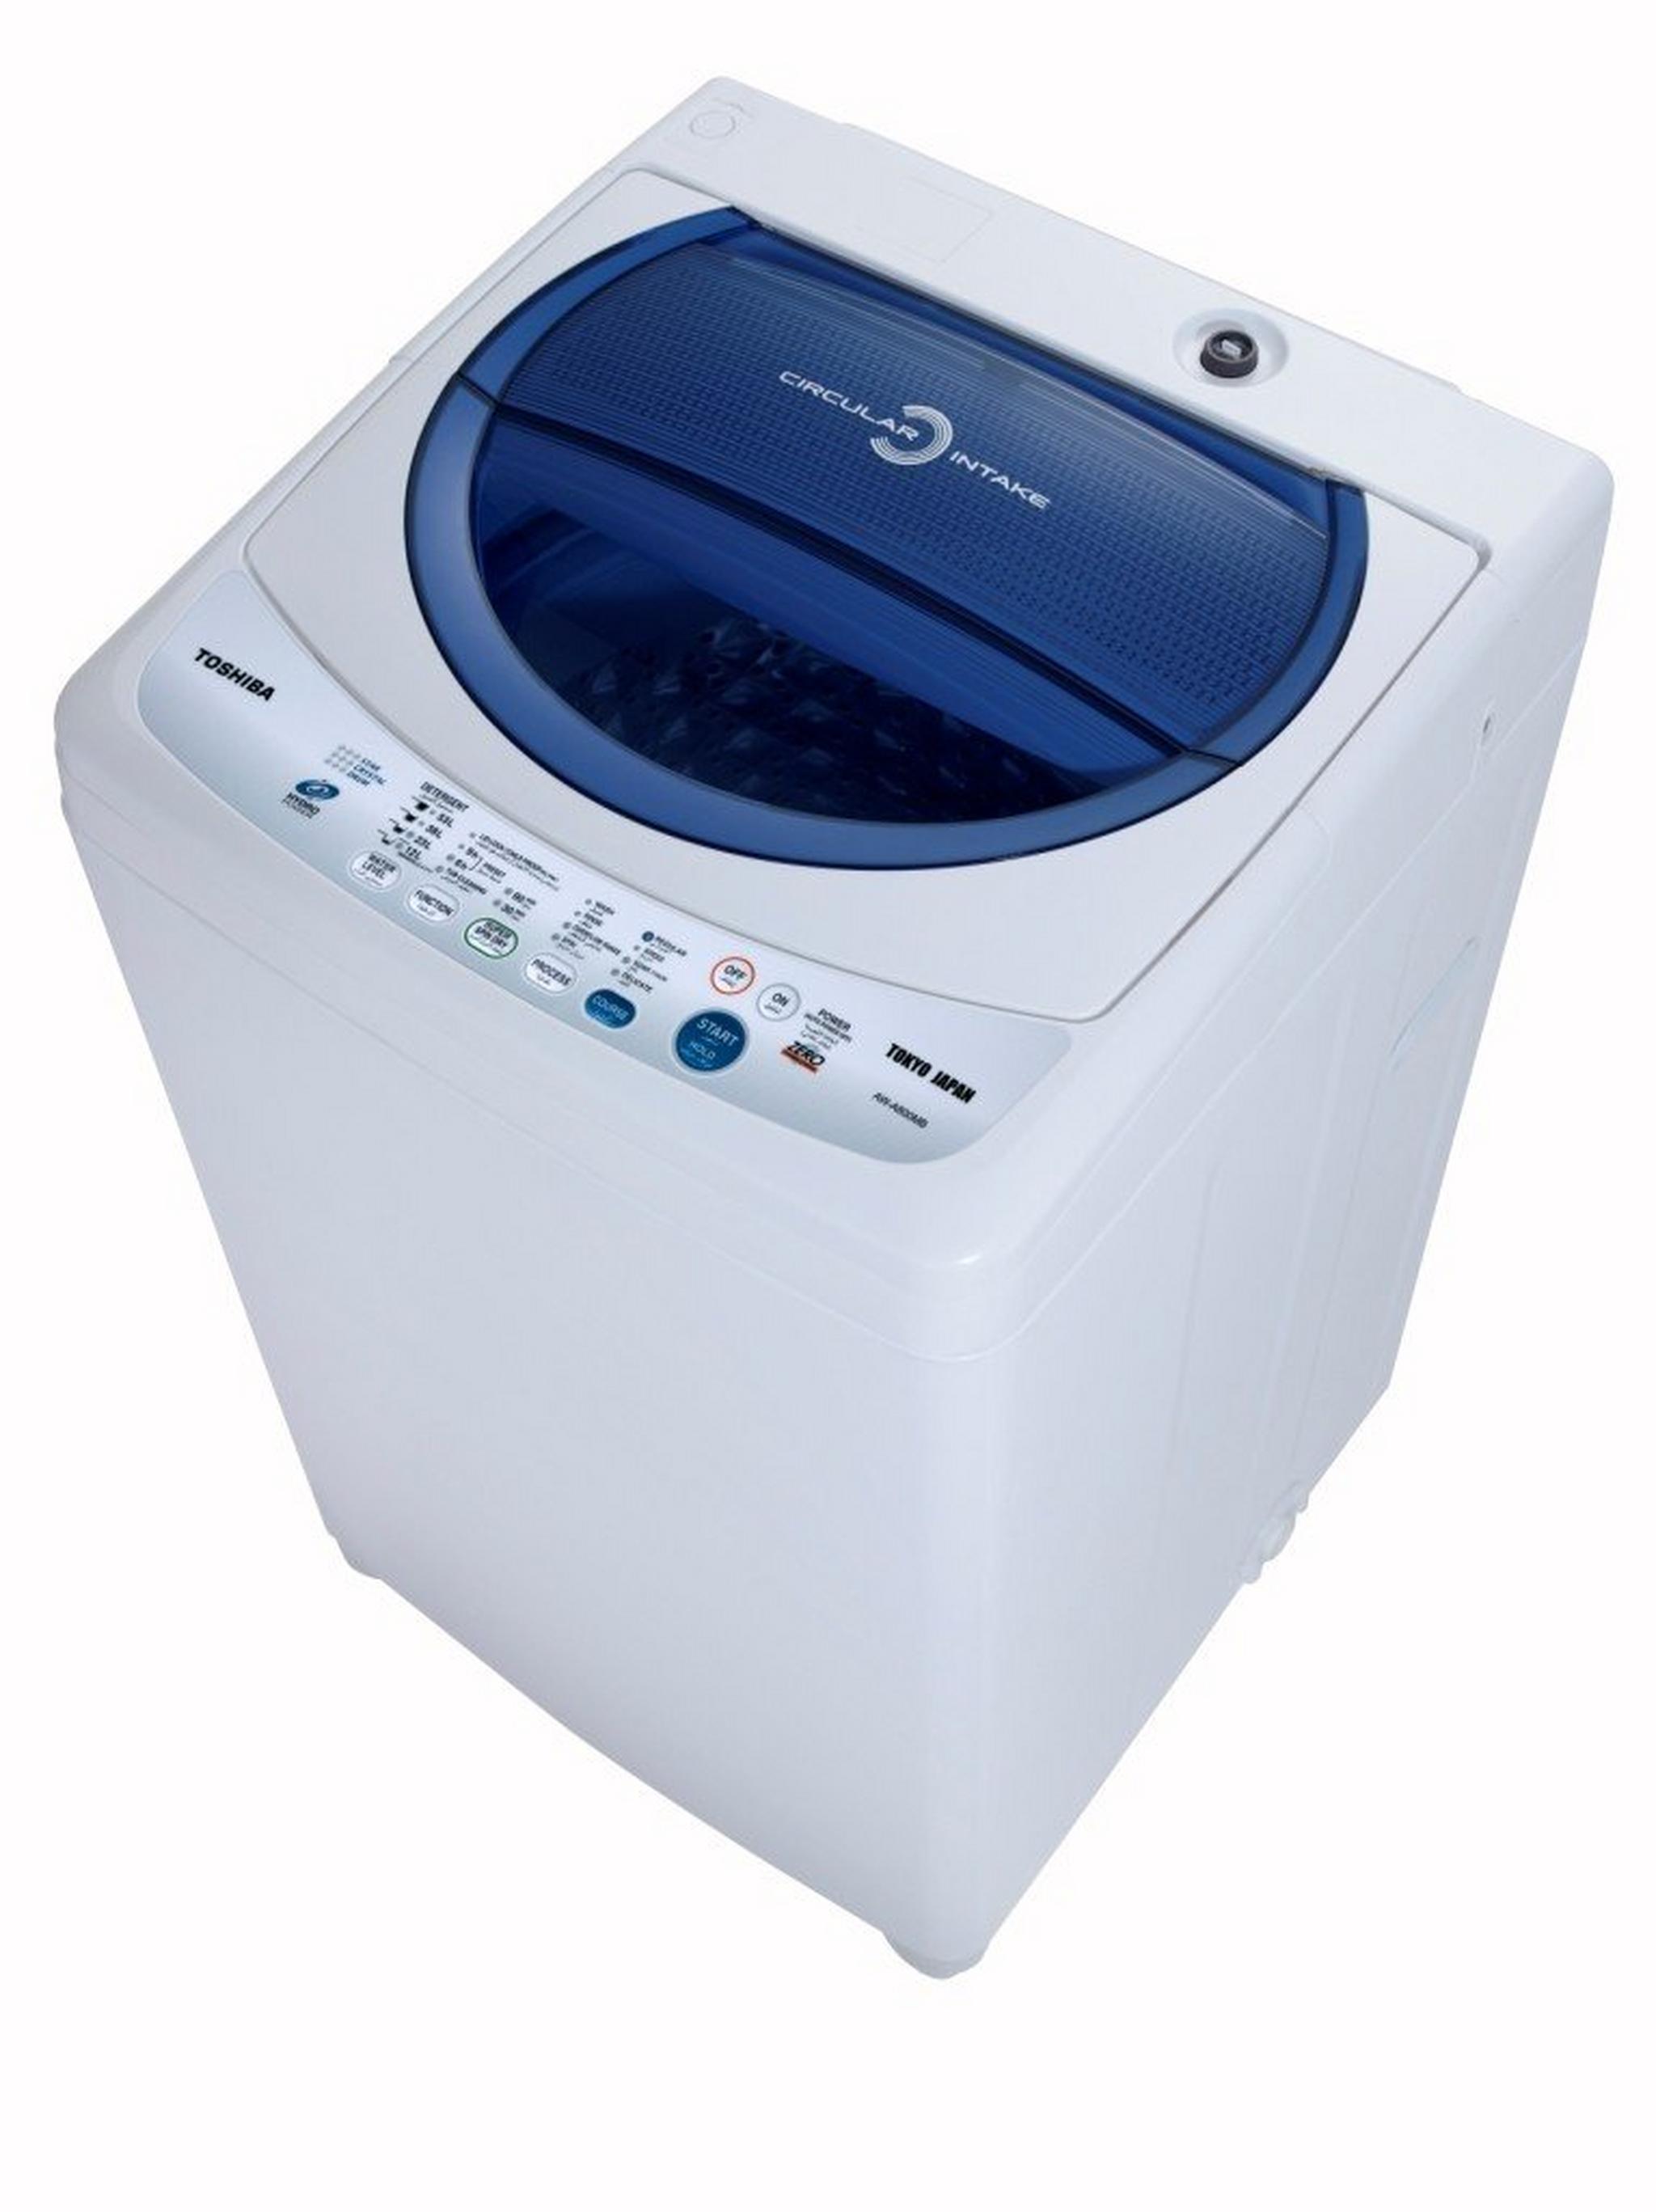 Toshiba AW-A800MBK(WB) Top Loader Washer 7kg - White/Blue